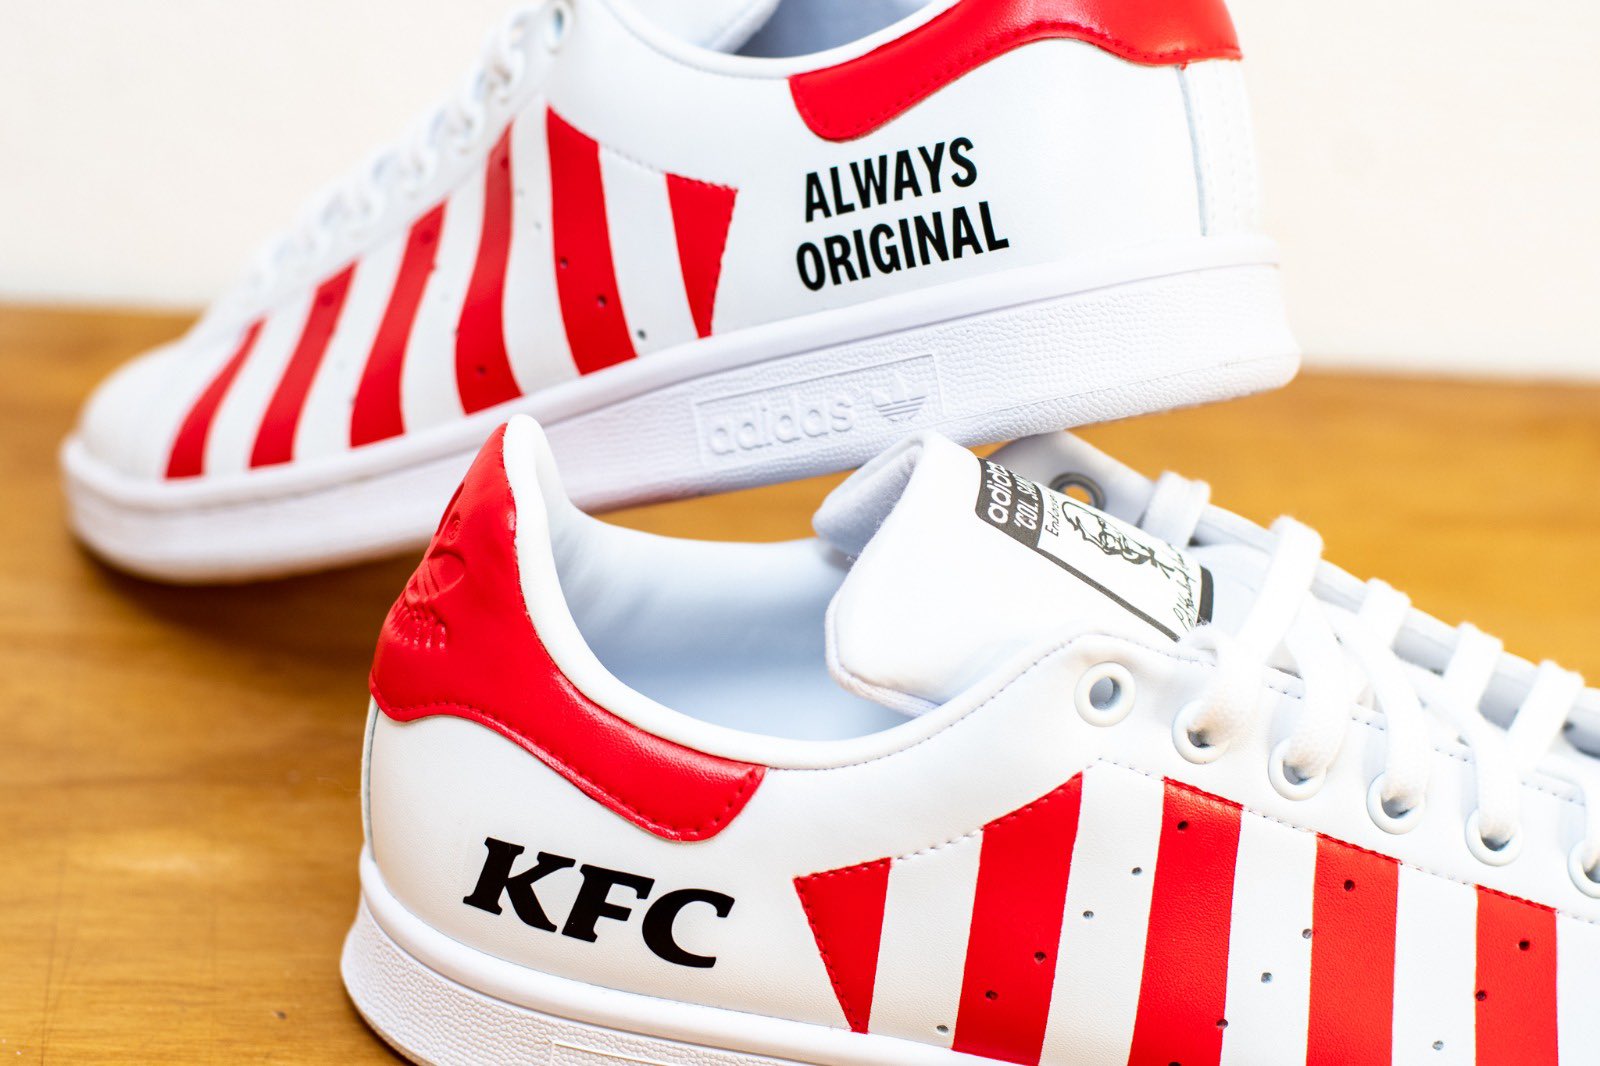 viva Ordenador portátil Oficiales The Shoe Dr. on Twitter: "KFC X THE SHOE DR. The biggest single project  I've done yet! 70 pairs of handcrafted custom sneakers for @KFC_UKI I based  the design on the iconic